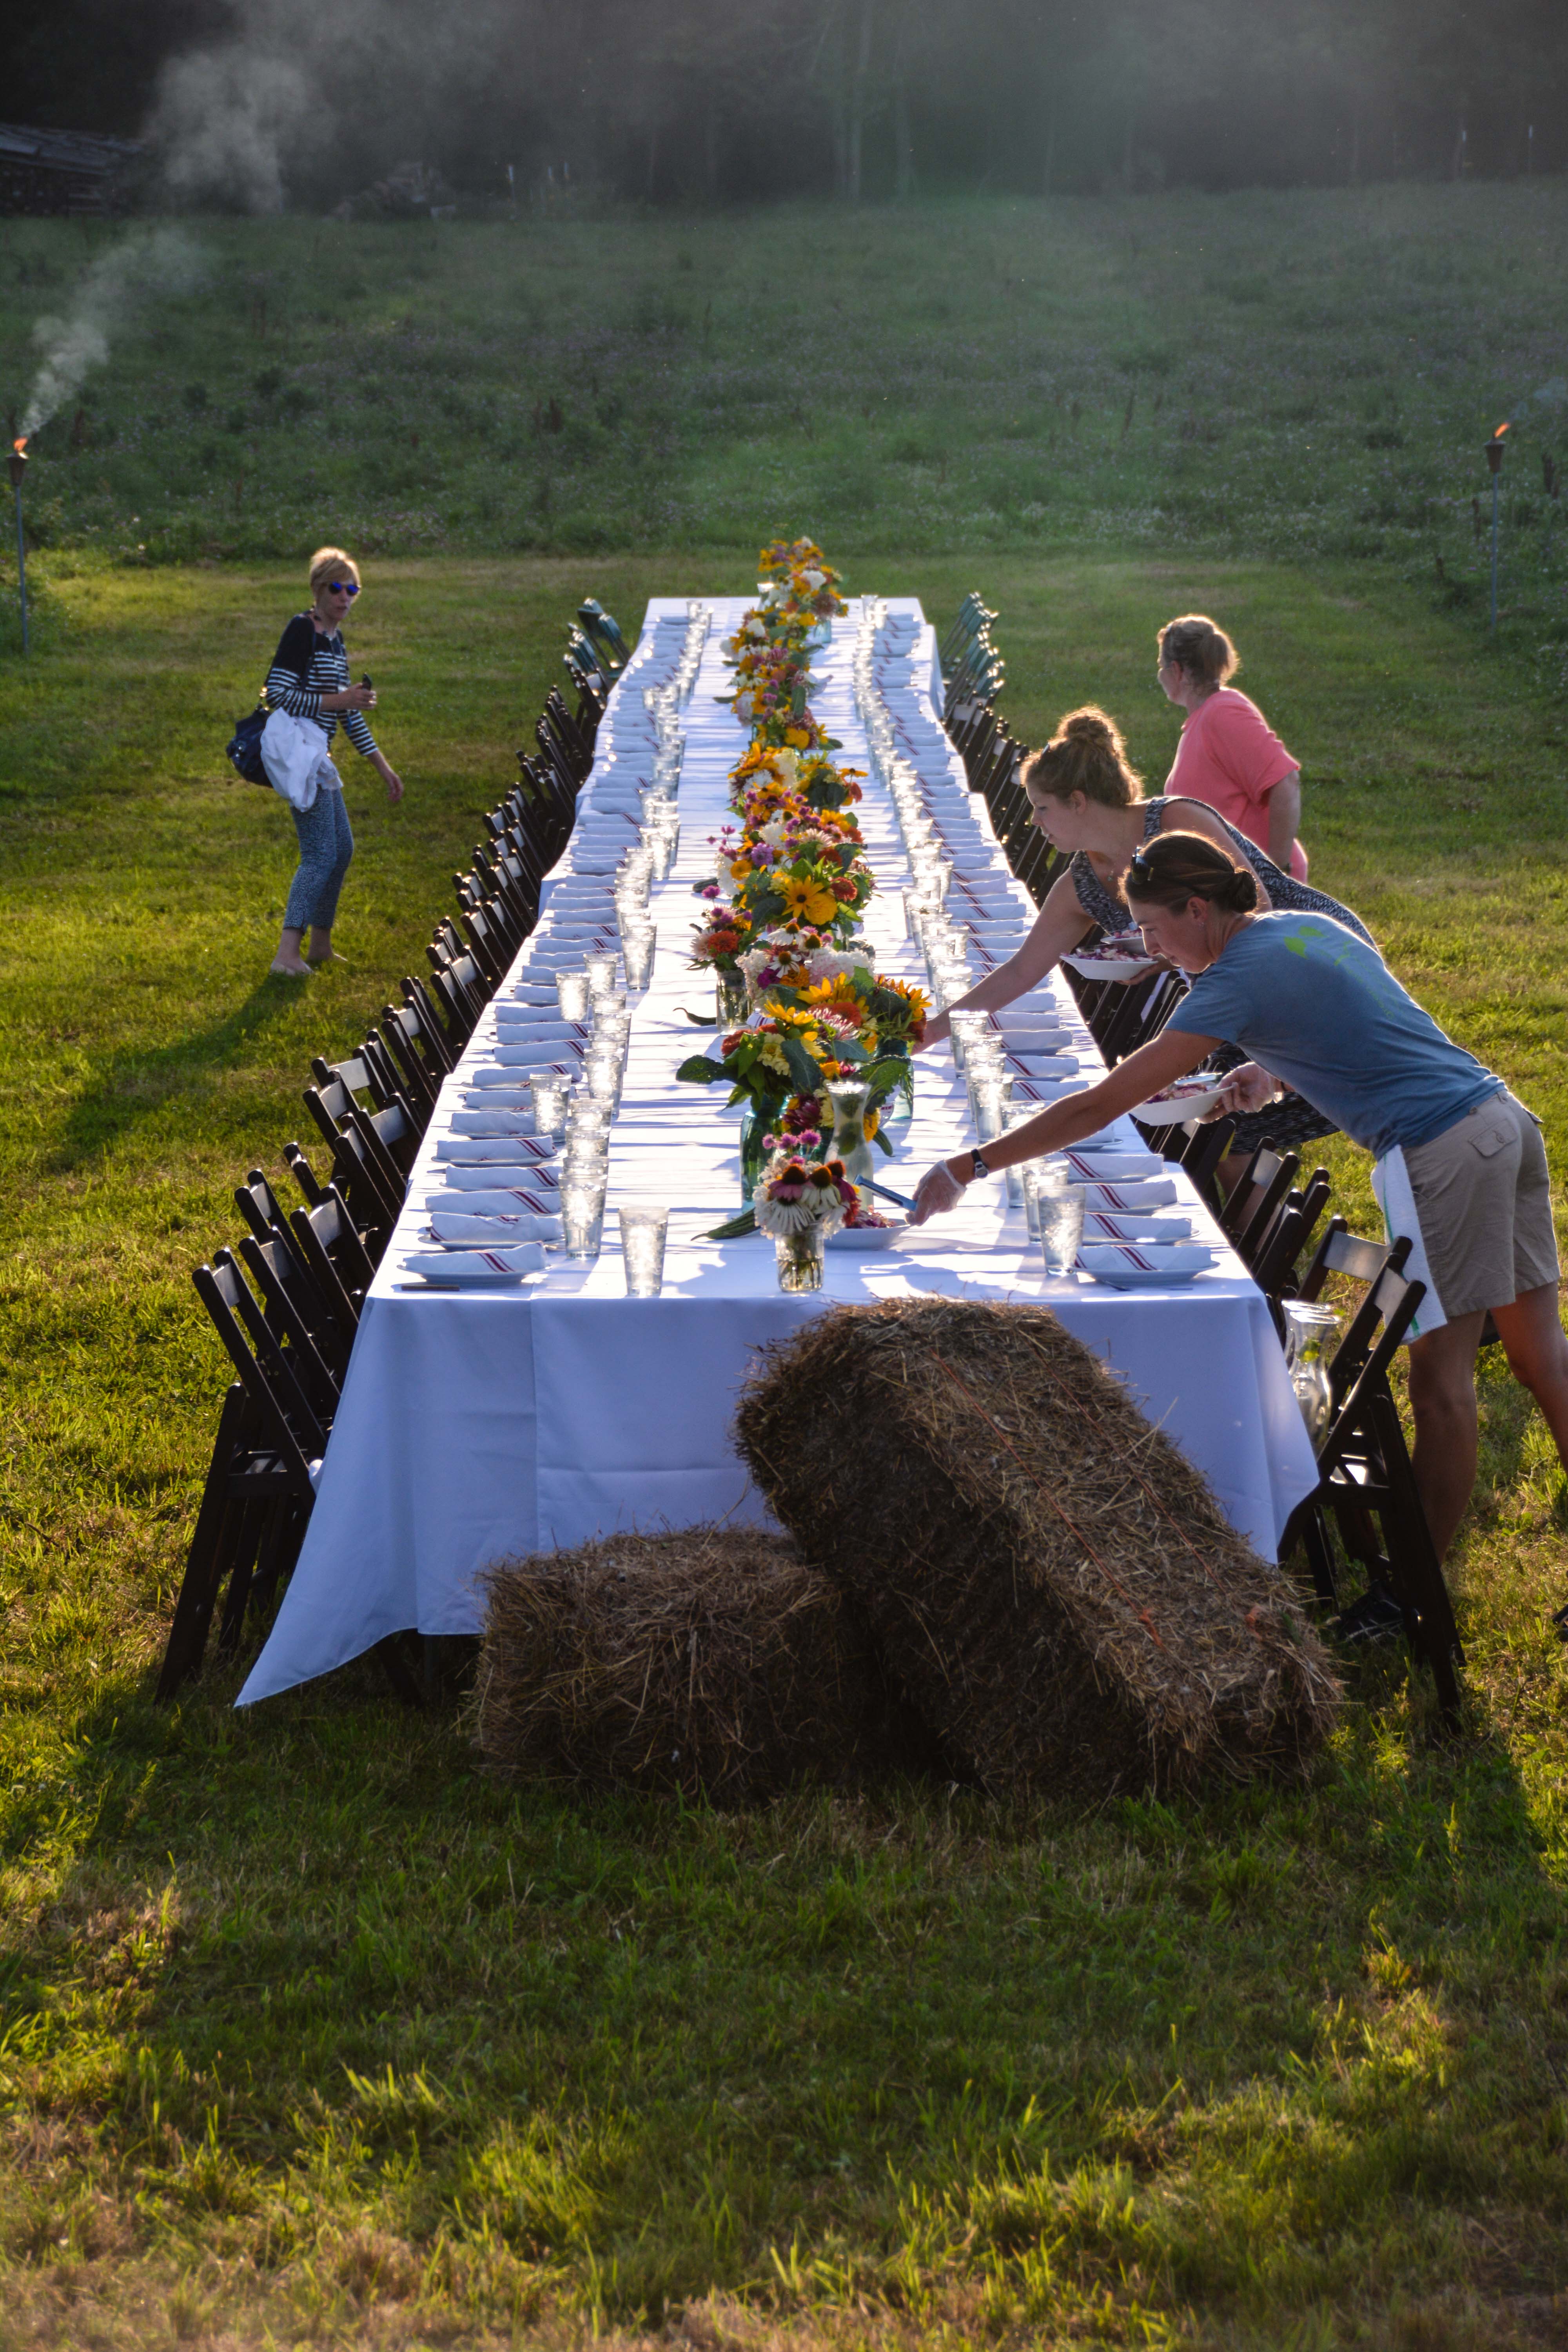 Field to table dinner with the PPA at Tangletown Gardens Farm, Minneapolis, MN - More images at Thinkingoutsidetheboxwood.com